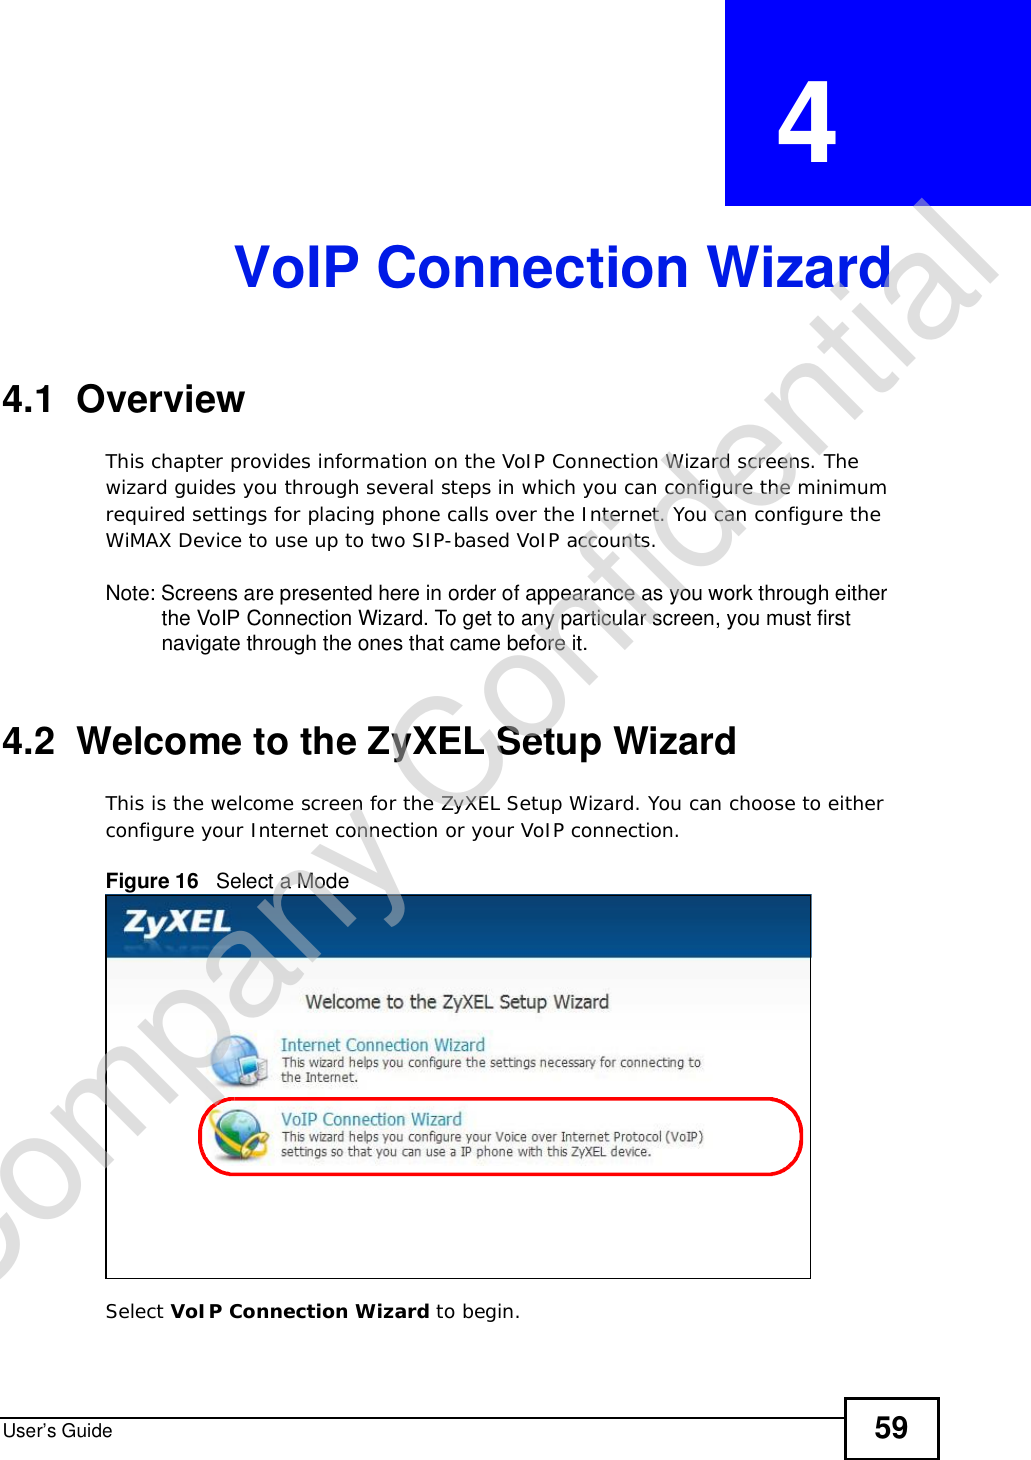 User’s Guide 59CHAPTER  4 VoIP Connection Wizard4.1  OverviewThis chapter provides information on the VoIP Connection Wizard screens. The wizard guides you through several steps in which you can configure the minimum required settings for placing phone calls over the Internet. You can configure the WiMAX Device to use up to two SIP-based VoIP accounts.Note: Screens are presented here in order of appearance as you work through either the VoIP Connection Wizard. To get to any particular screen, you must first navigate through the ones that came before it.4.2  Welcome to the ZyXEL Setup WizardThis is the welcome screen for the ZyXEL Setup Wizard. You can choose to either configure your Internet connection or your VoIP connection.Figure 16   Select a ModeSelect VoIP Connection Wizard to begin.Company Confidential